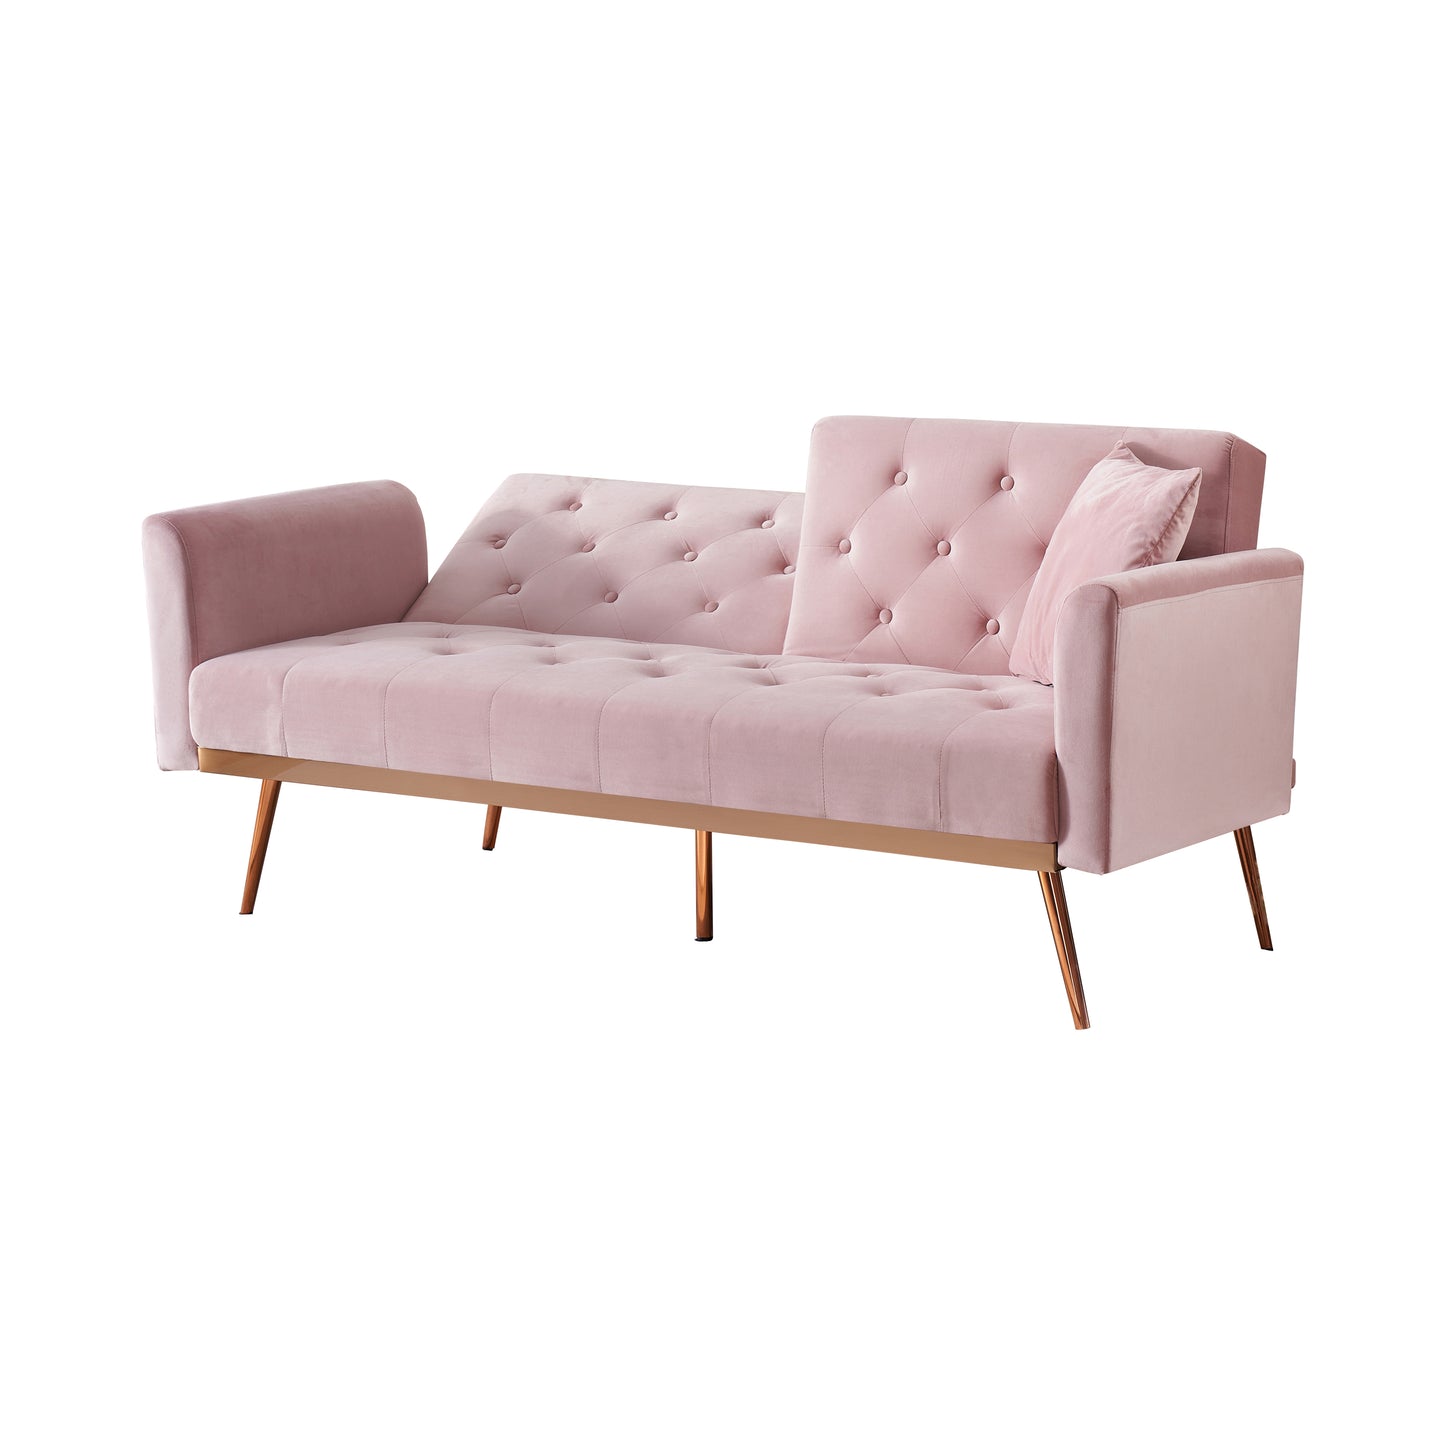 68.3" Pink velvet nail head sofa bed with throw pillow and midfoot